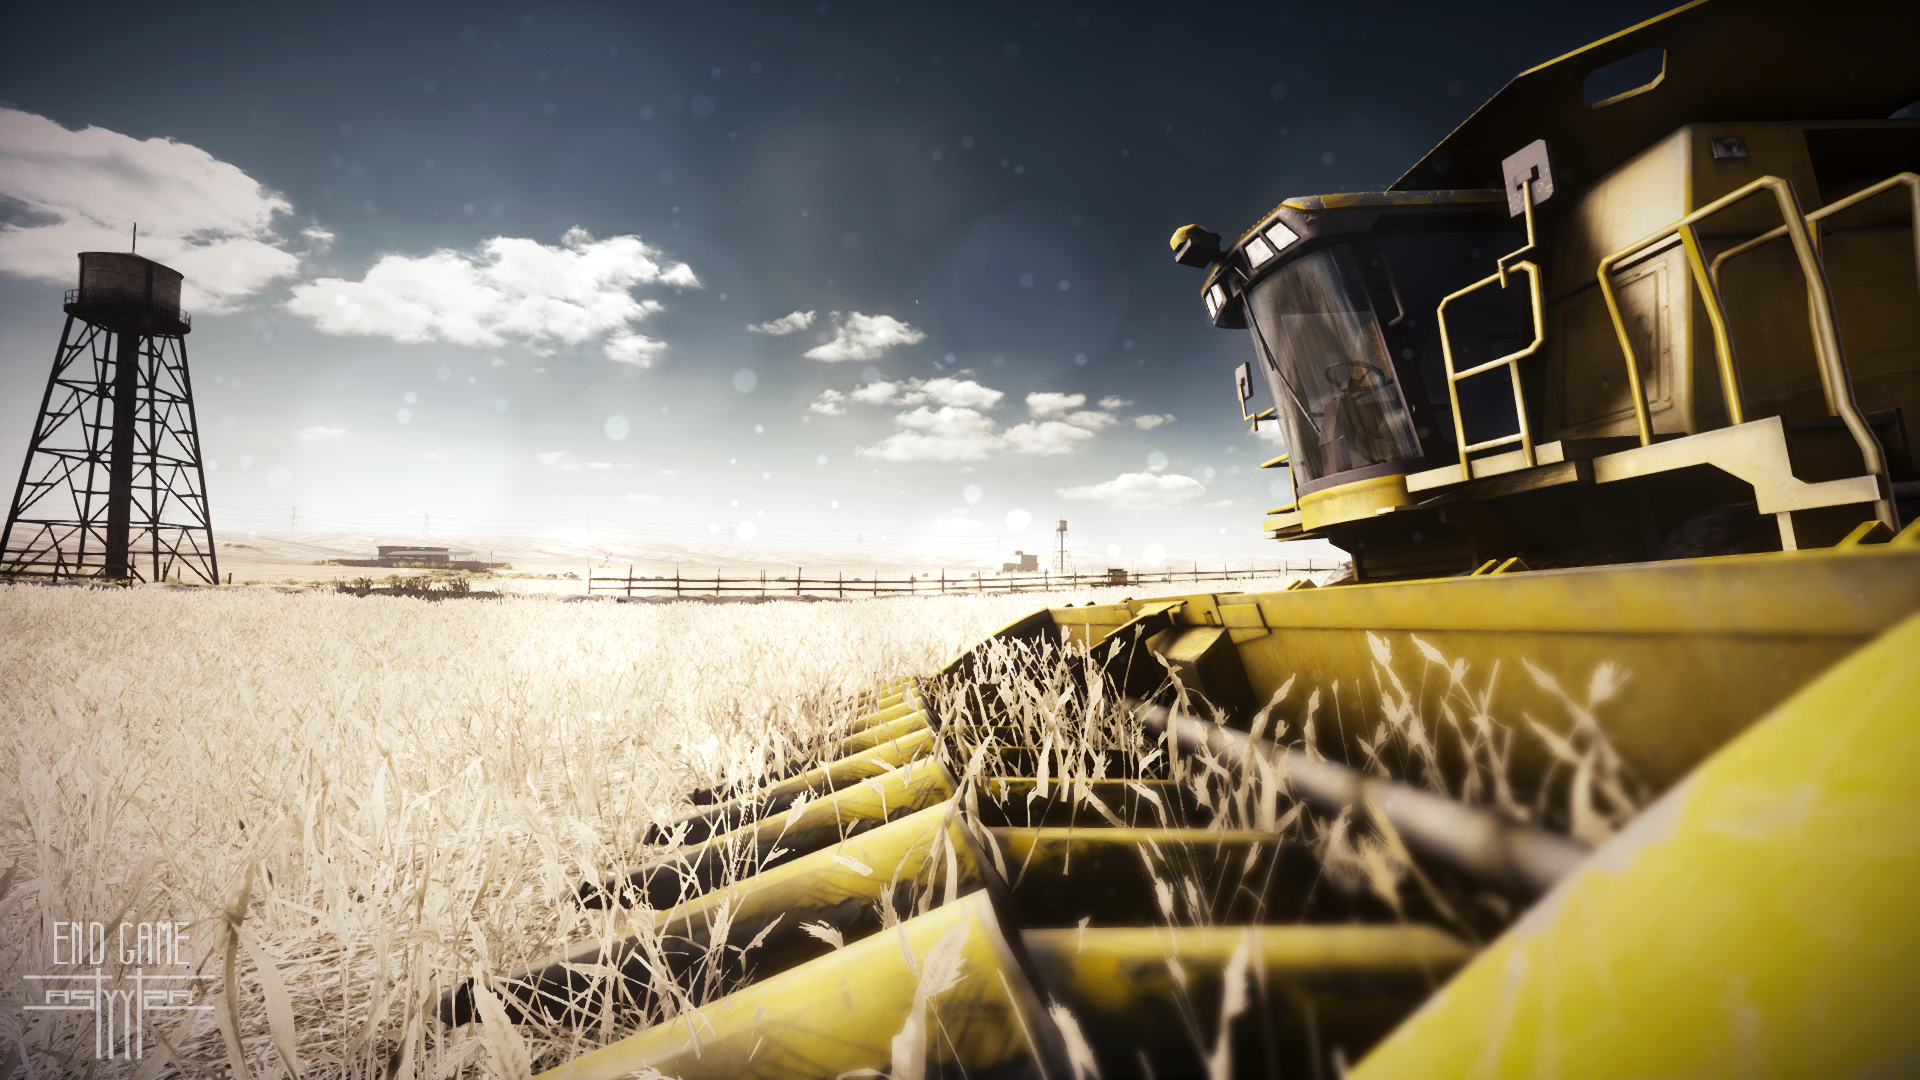 Related Pictures tractor in field wallpapers